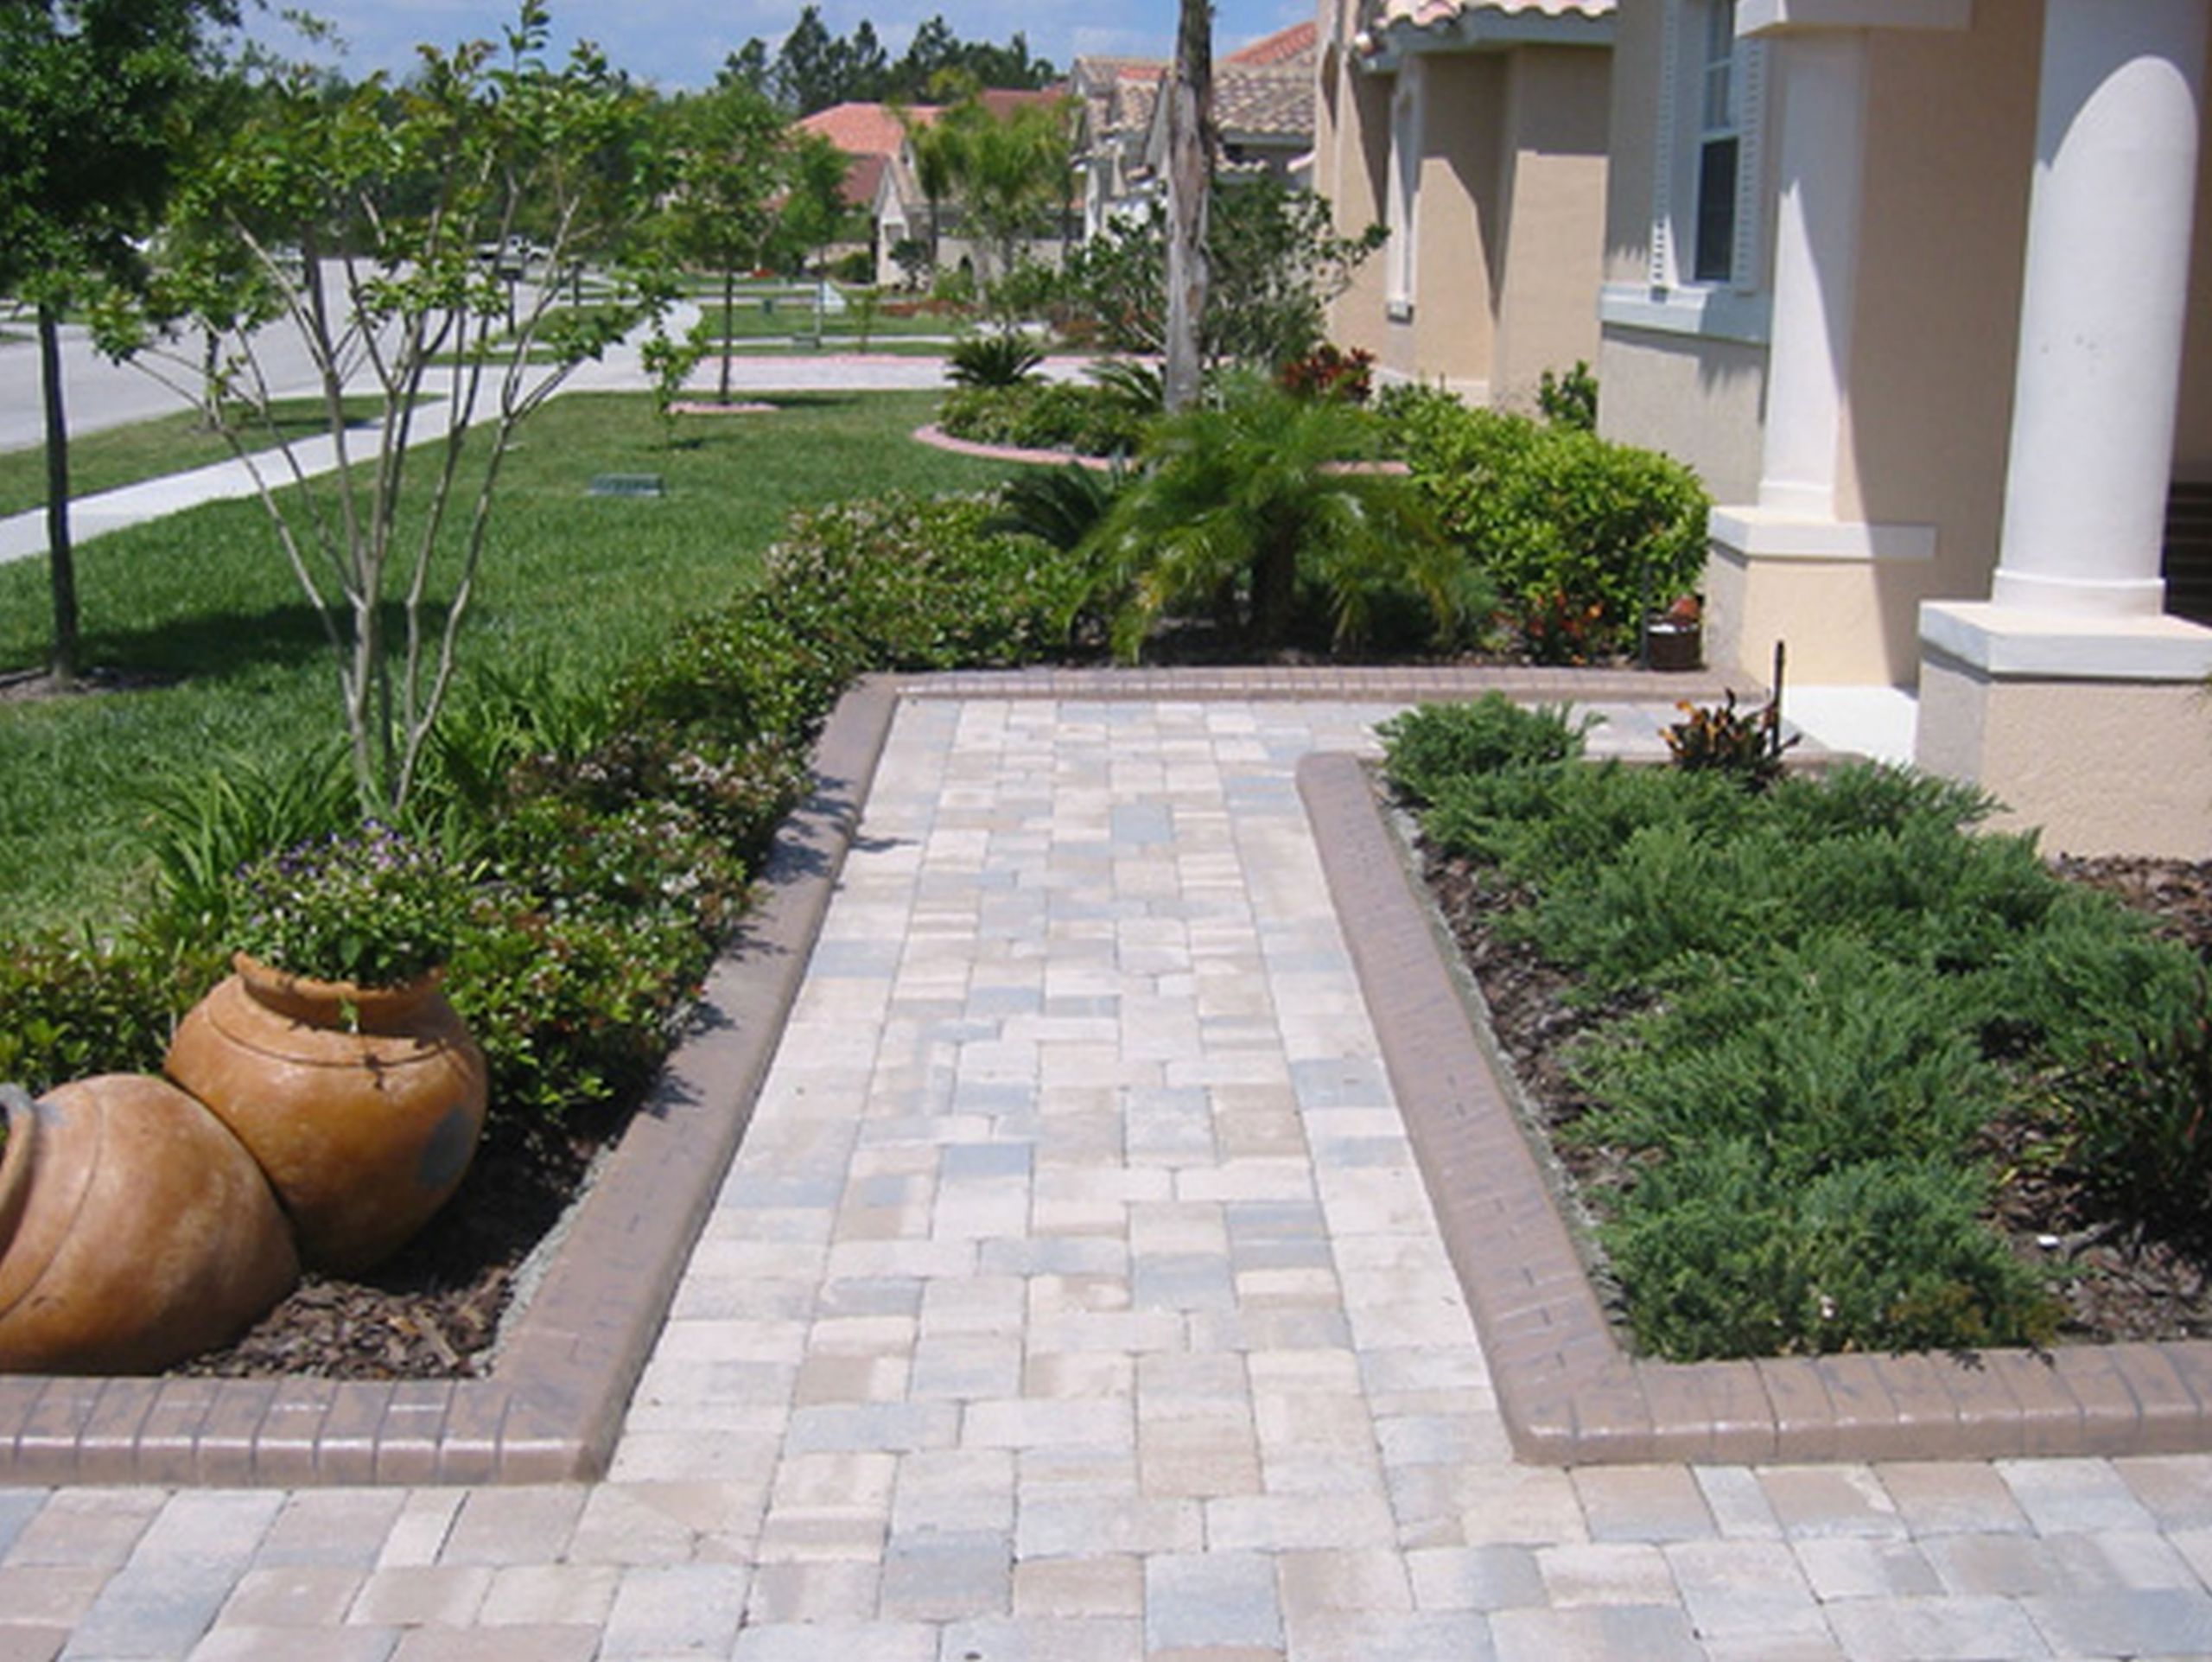 Home Depot Landscape Design
 Landscaping How To Install Home Depot Stone Edging For